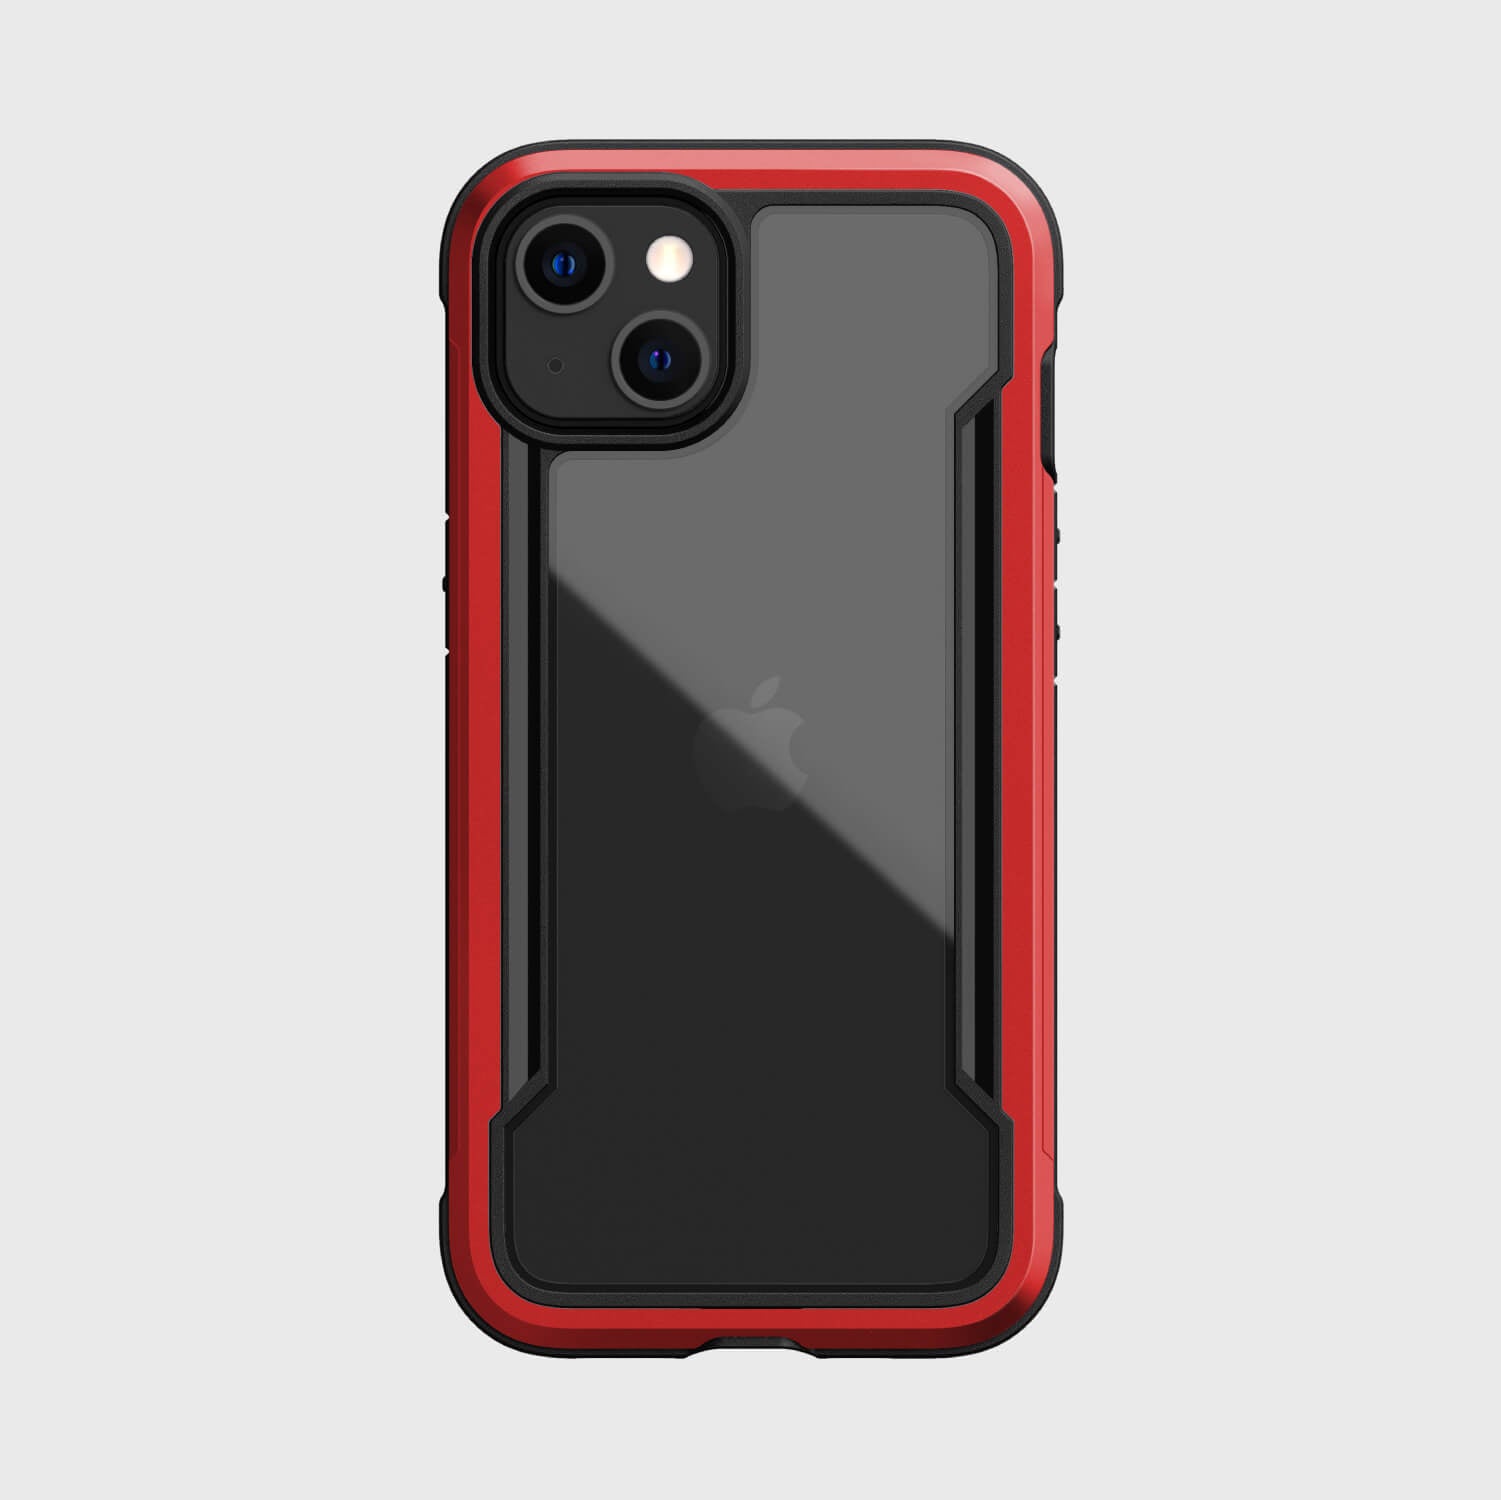 The Raptic Shield Pro iPhone 11 case provides drop protection with a sleek design in red and black.